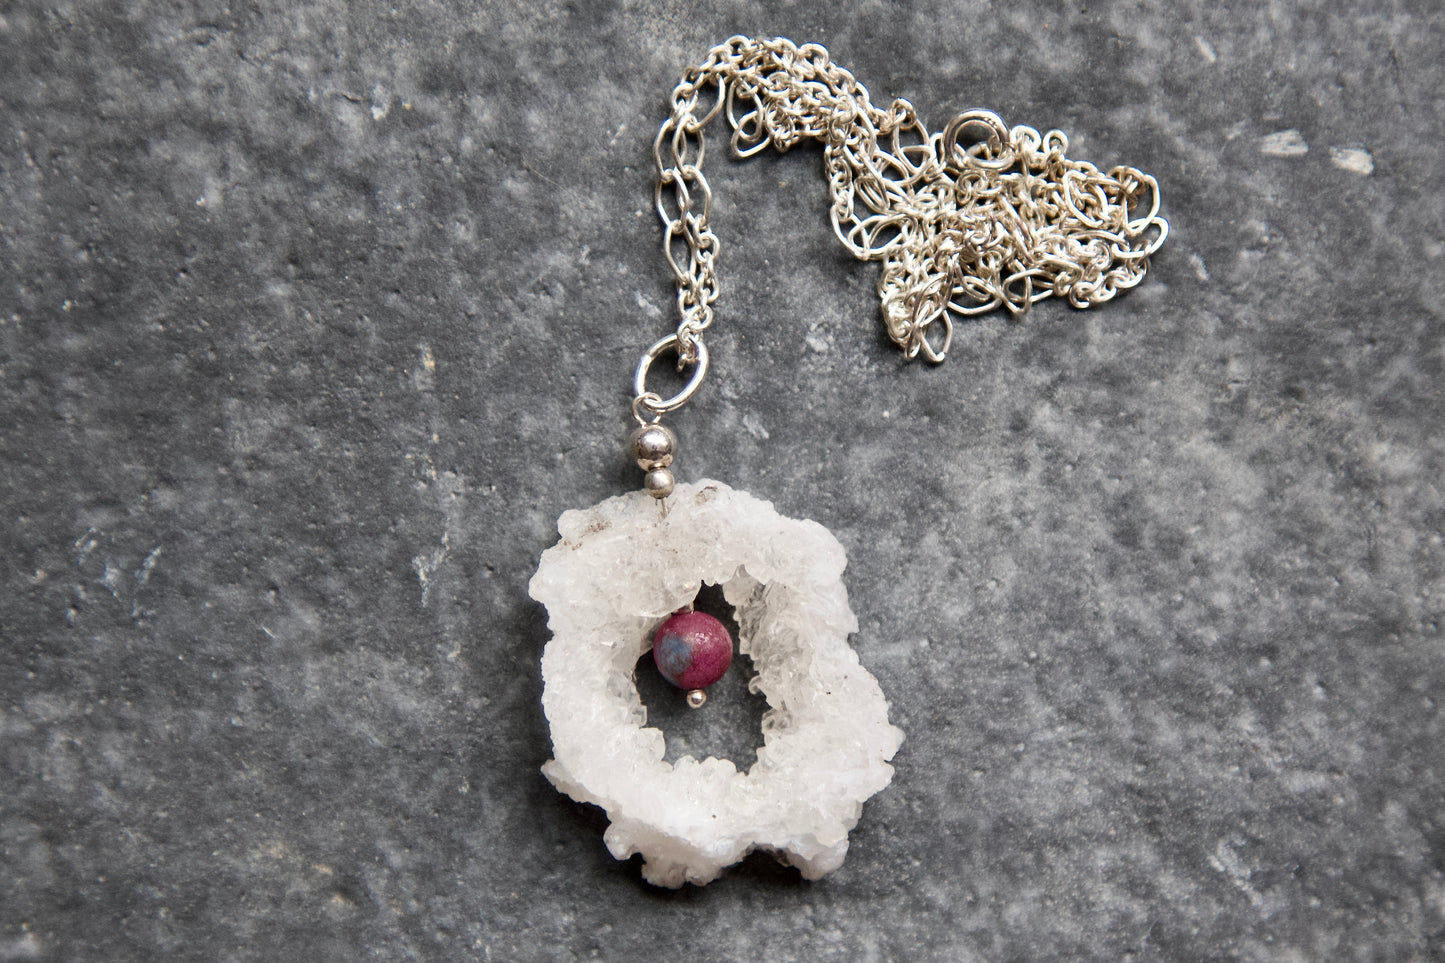 Clear Quartz Crystal Geode Slice, Ruby and Kyanite, and Sterling Silver Pendant Necklace